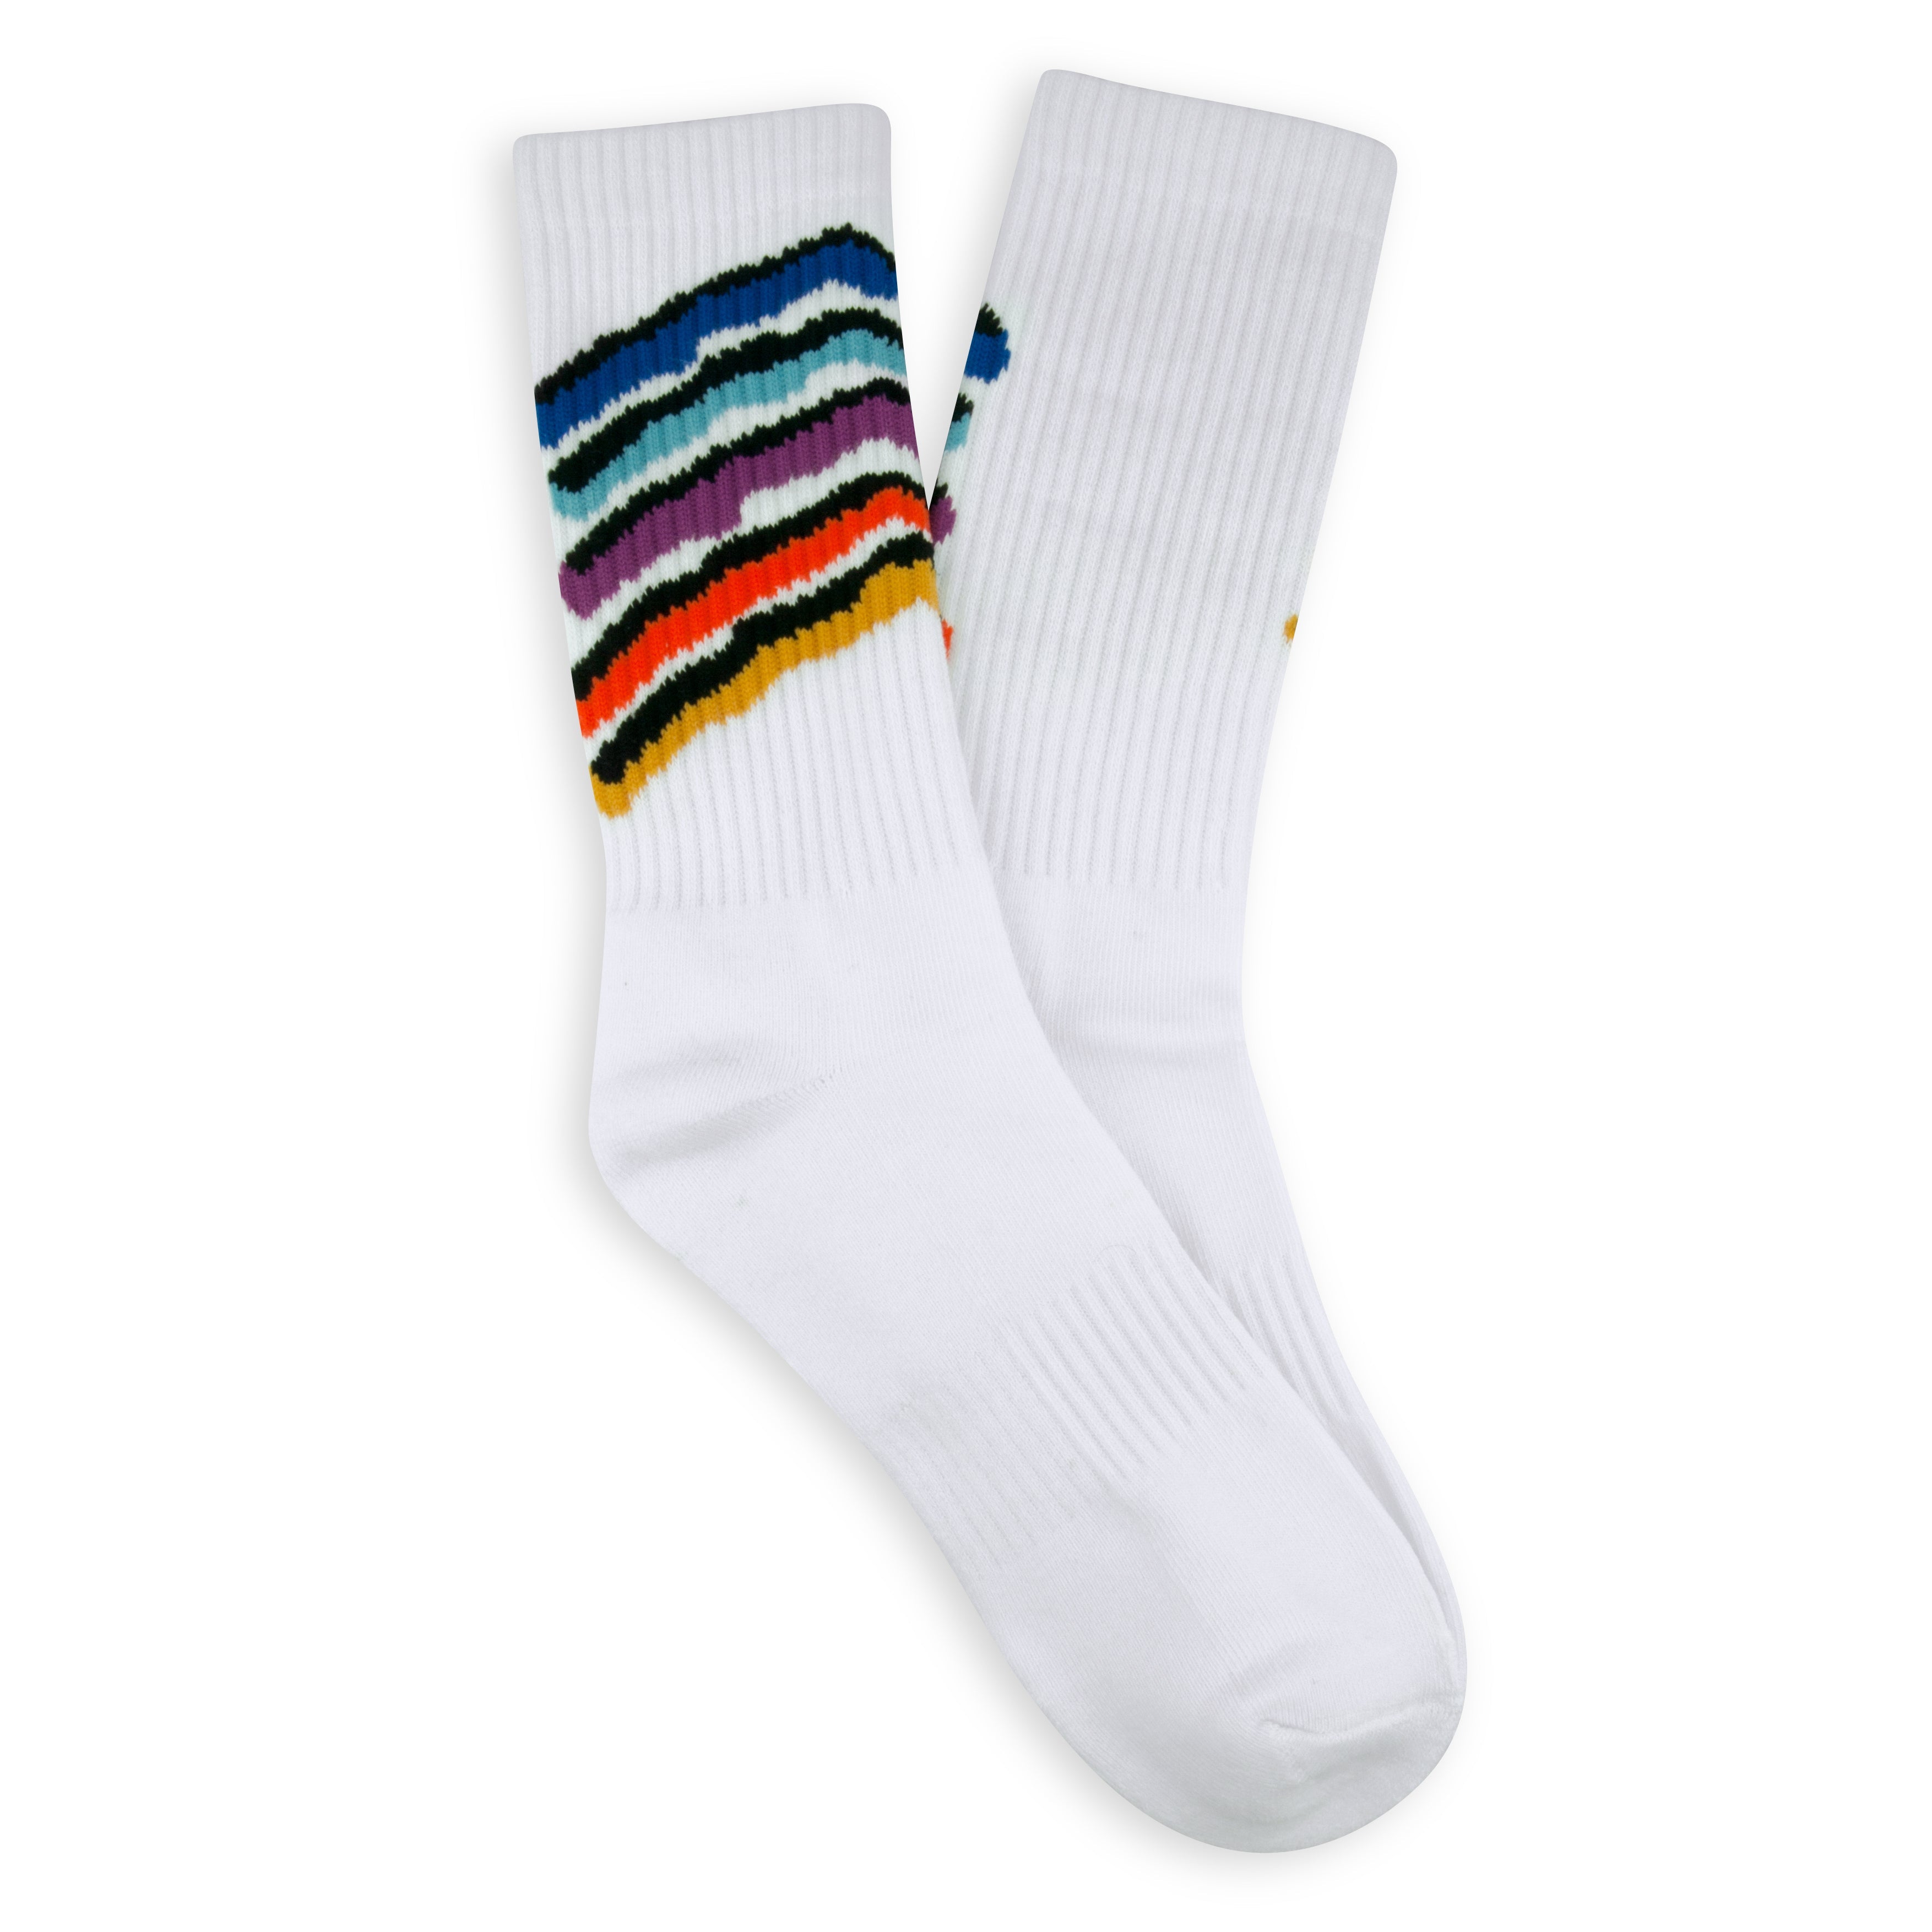 Mystery Pack of Grip Socks Logo, Color, & Grip Style Vary - 5 Pack Only